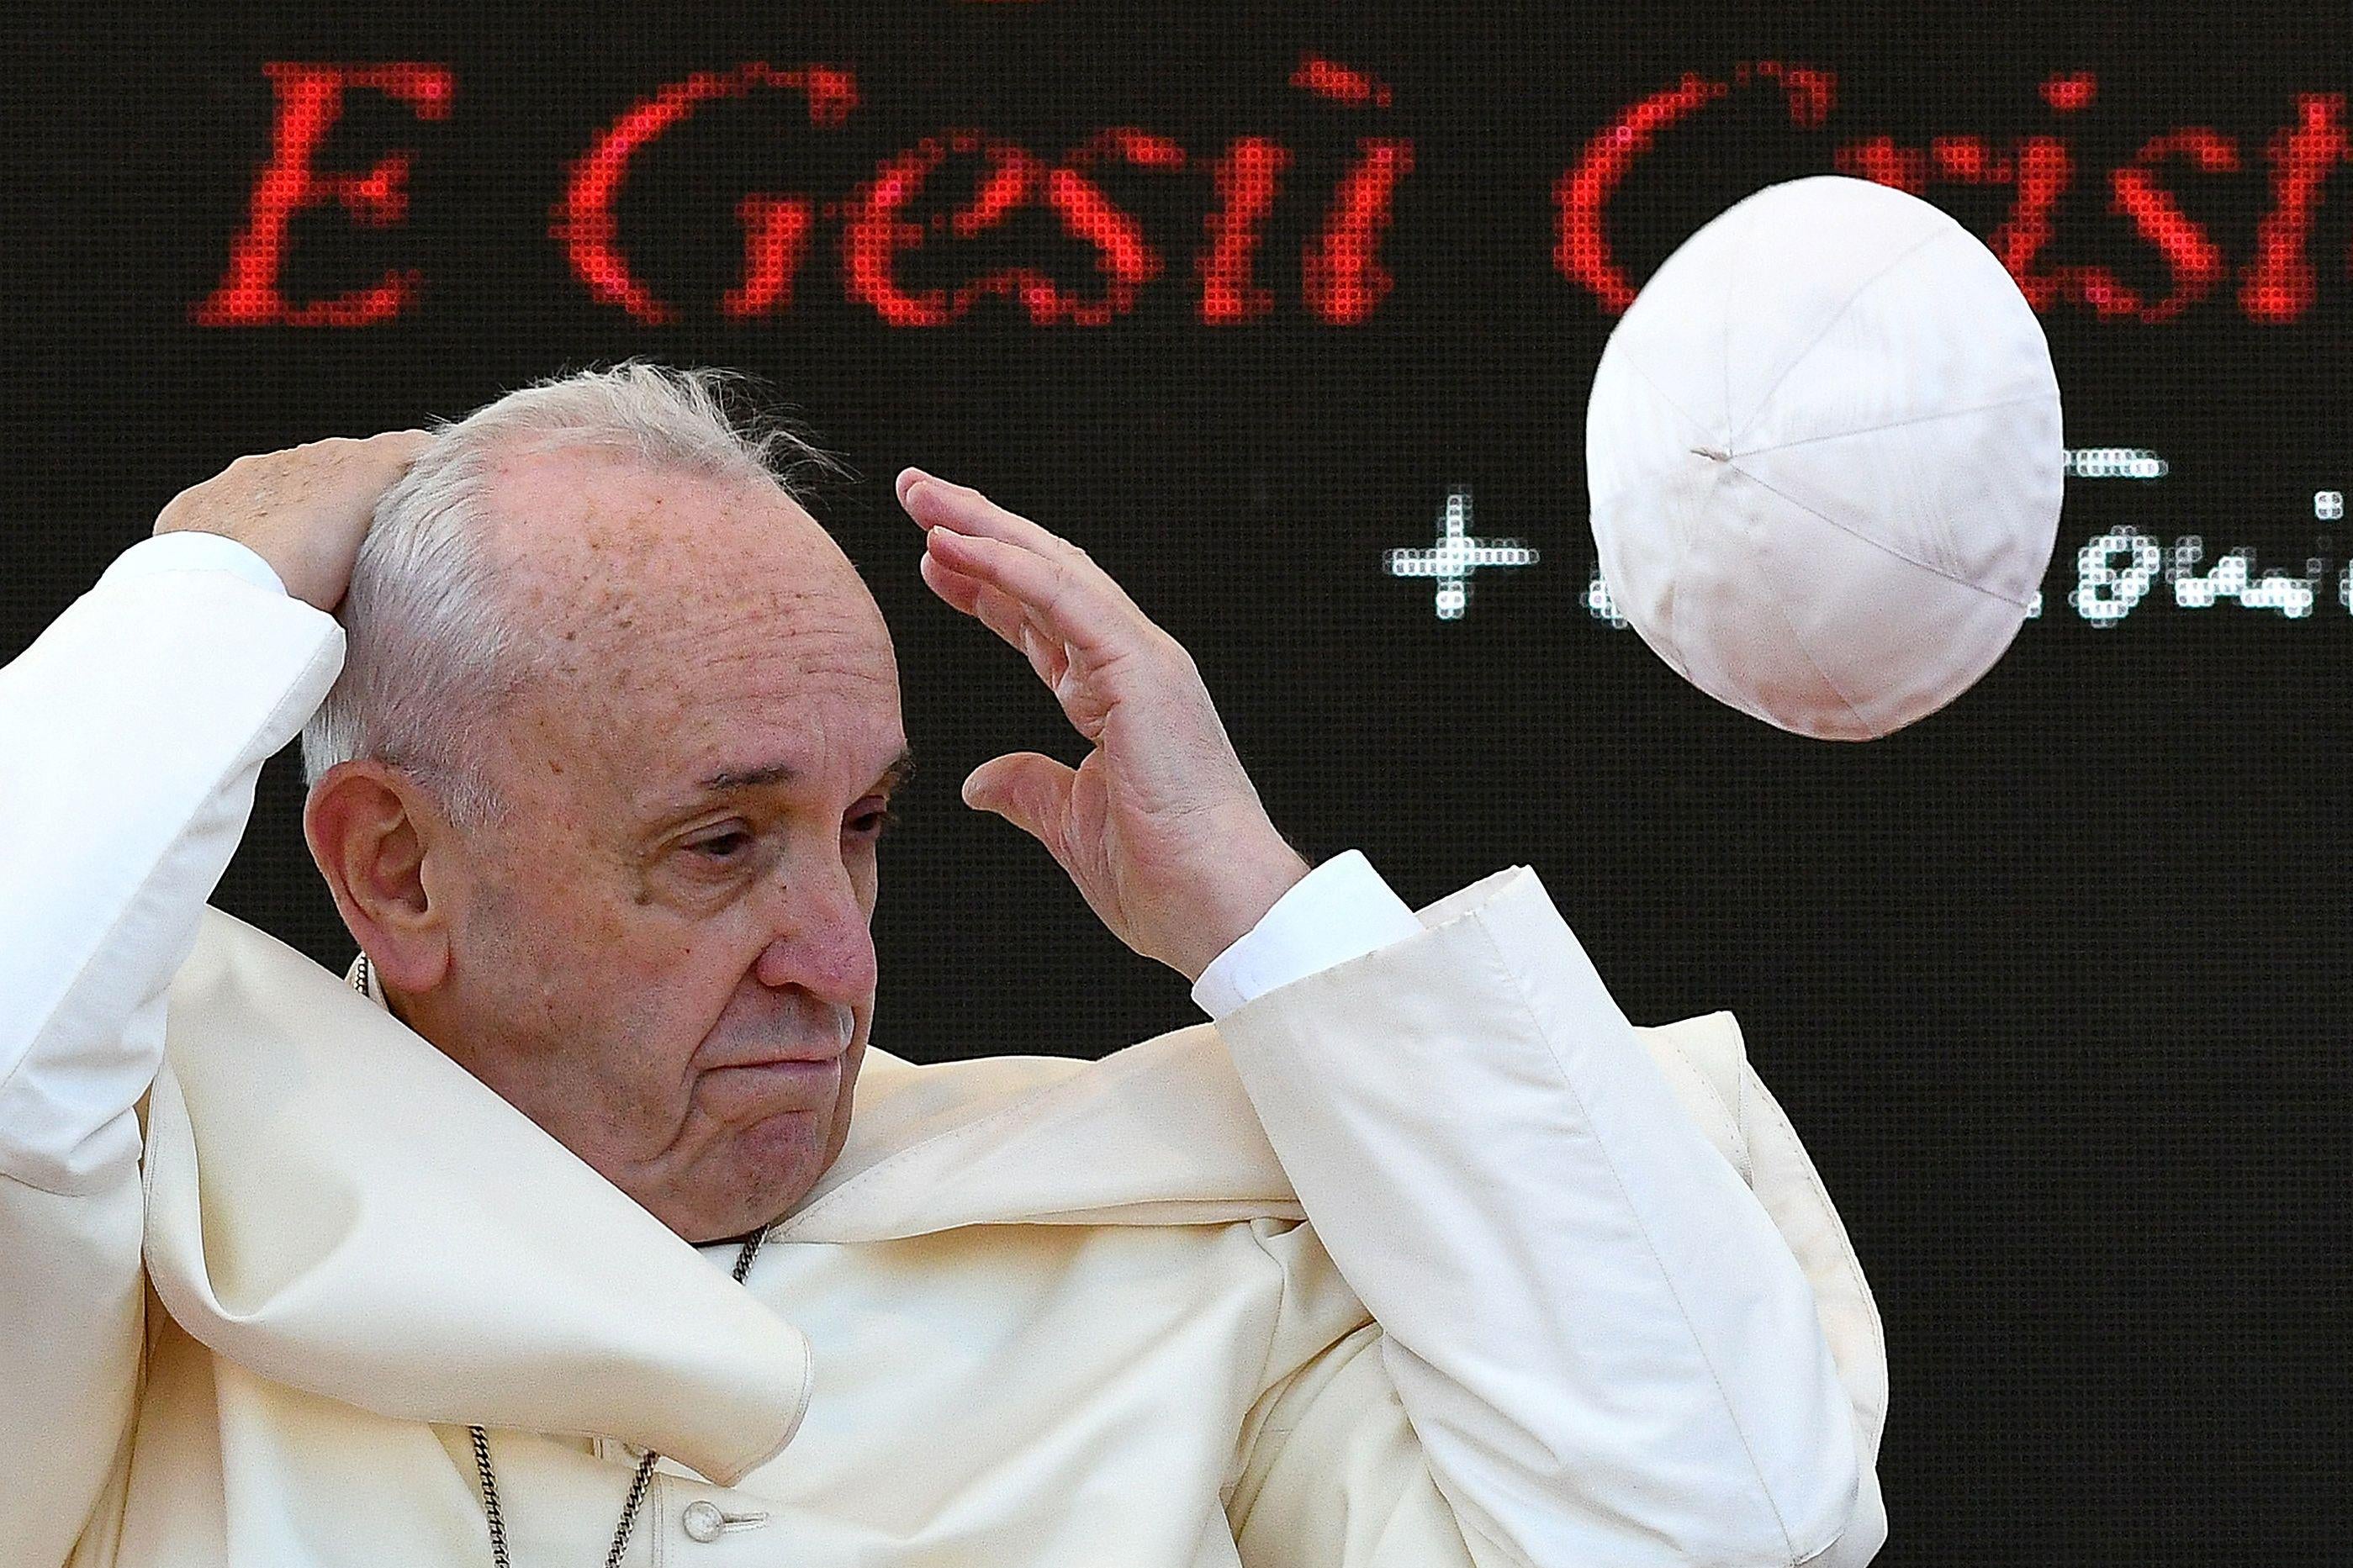 Pope Francis reaches his hands to his head as his zucchetto (skullcap) blows away in the wind.